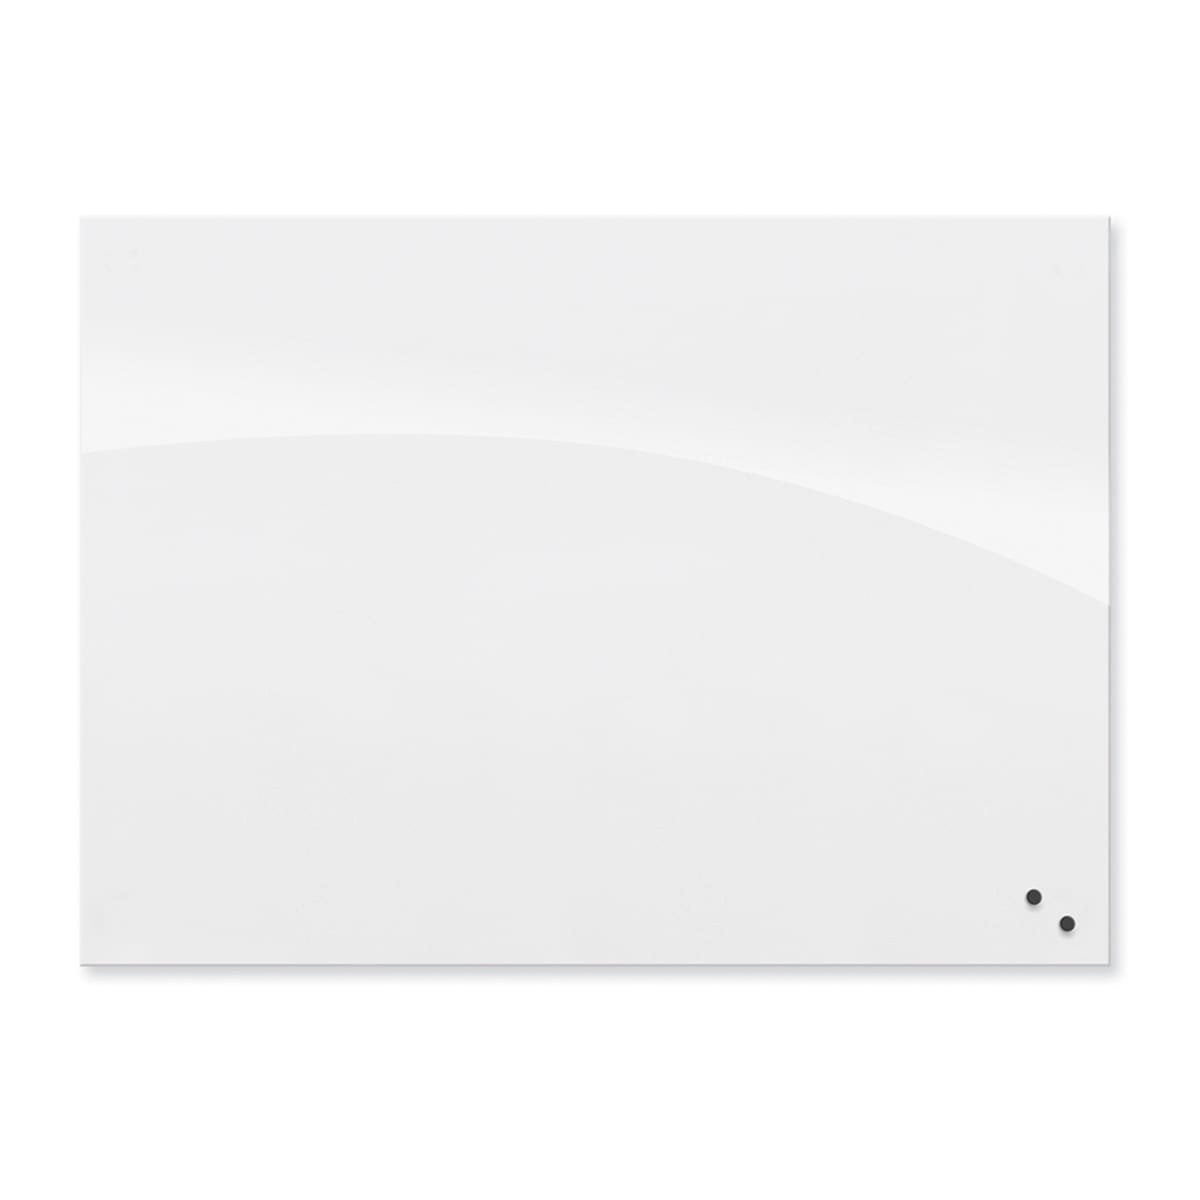 Mooreco InSight Low Iron Magnetic Glass Board - Gloss White - 4'H x 5'W (Mooreco 83906) - SchoolOutlet